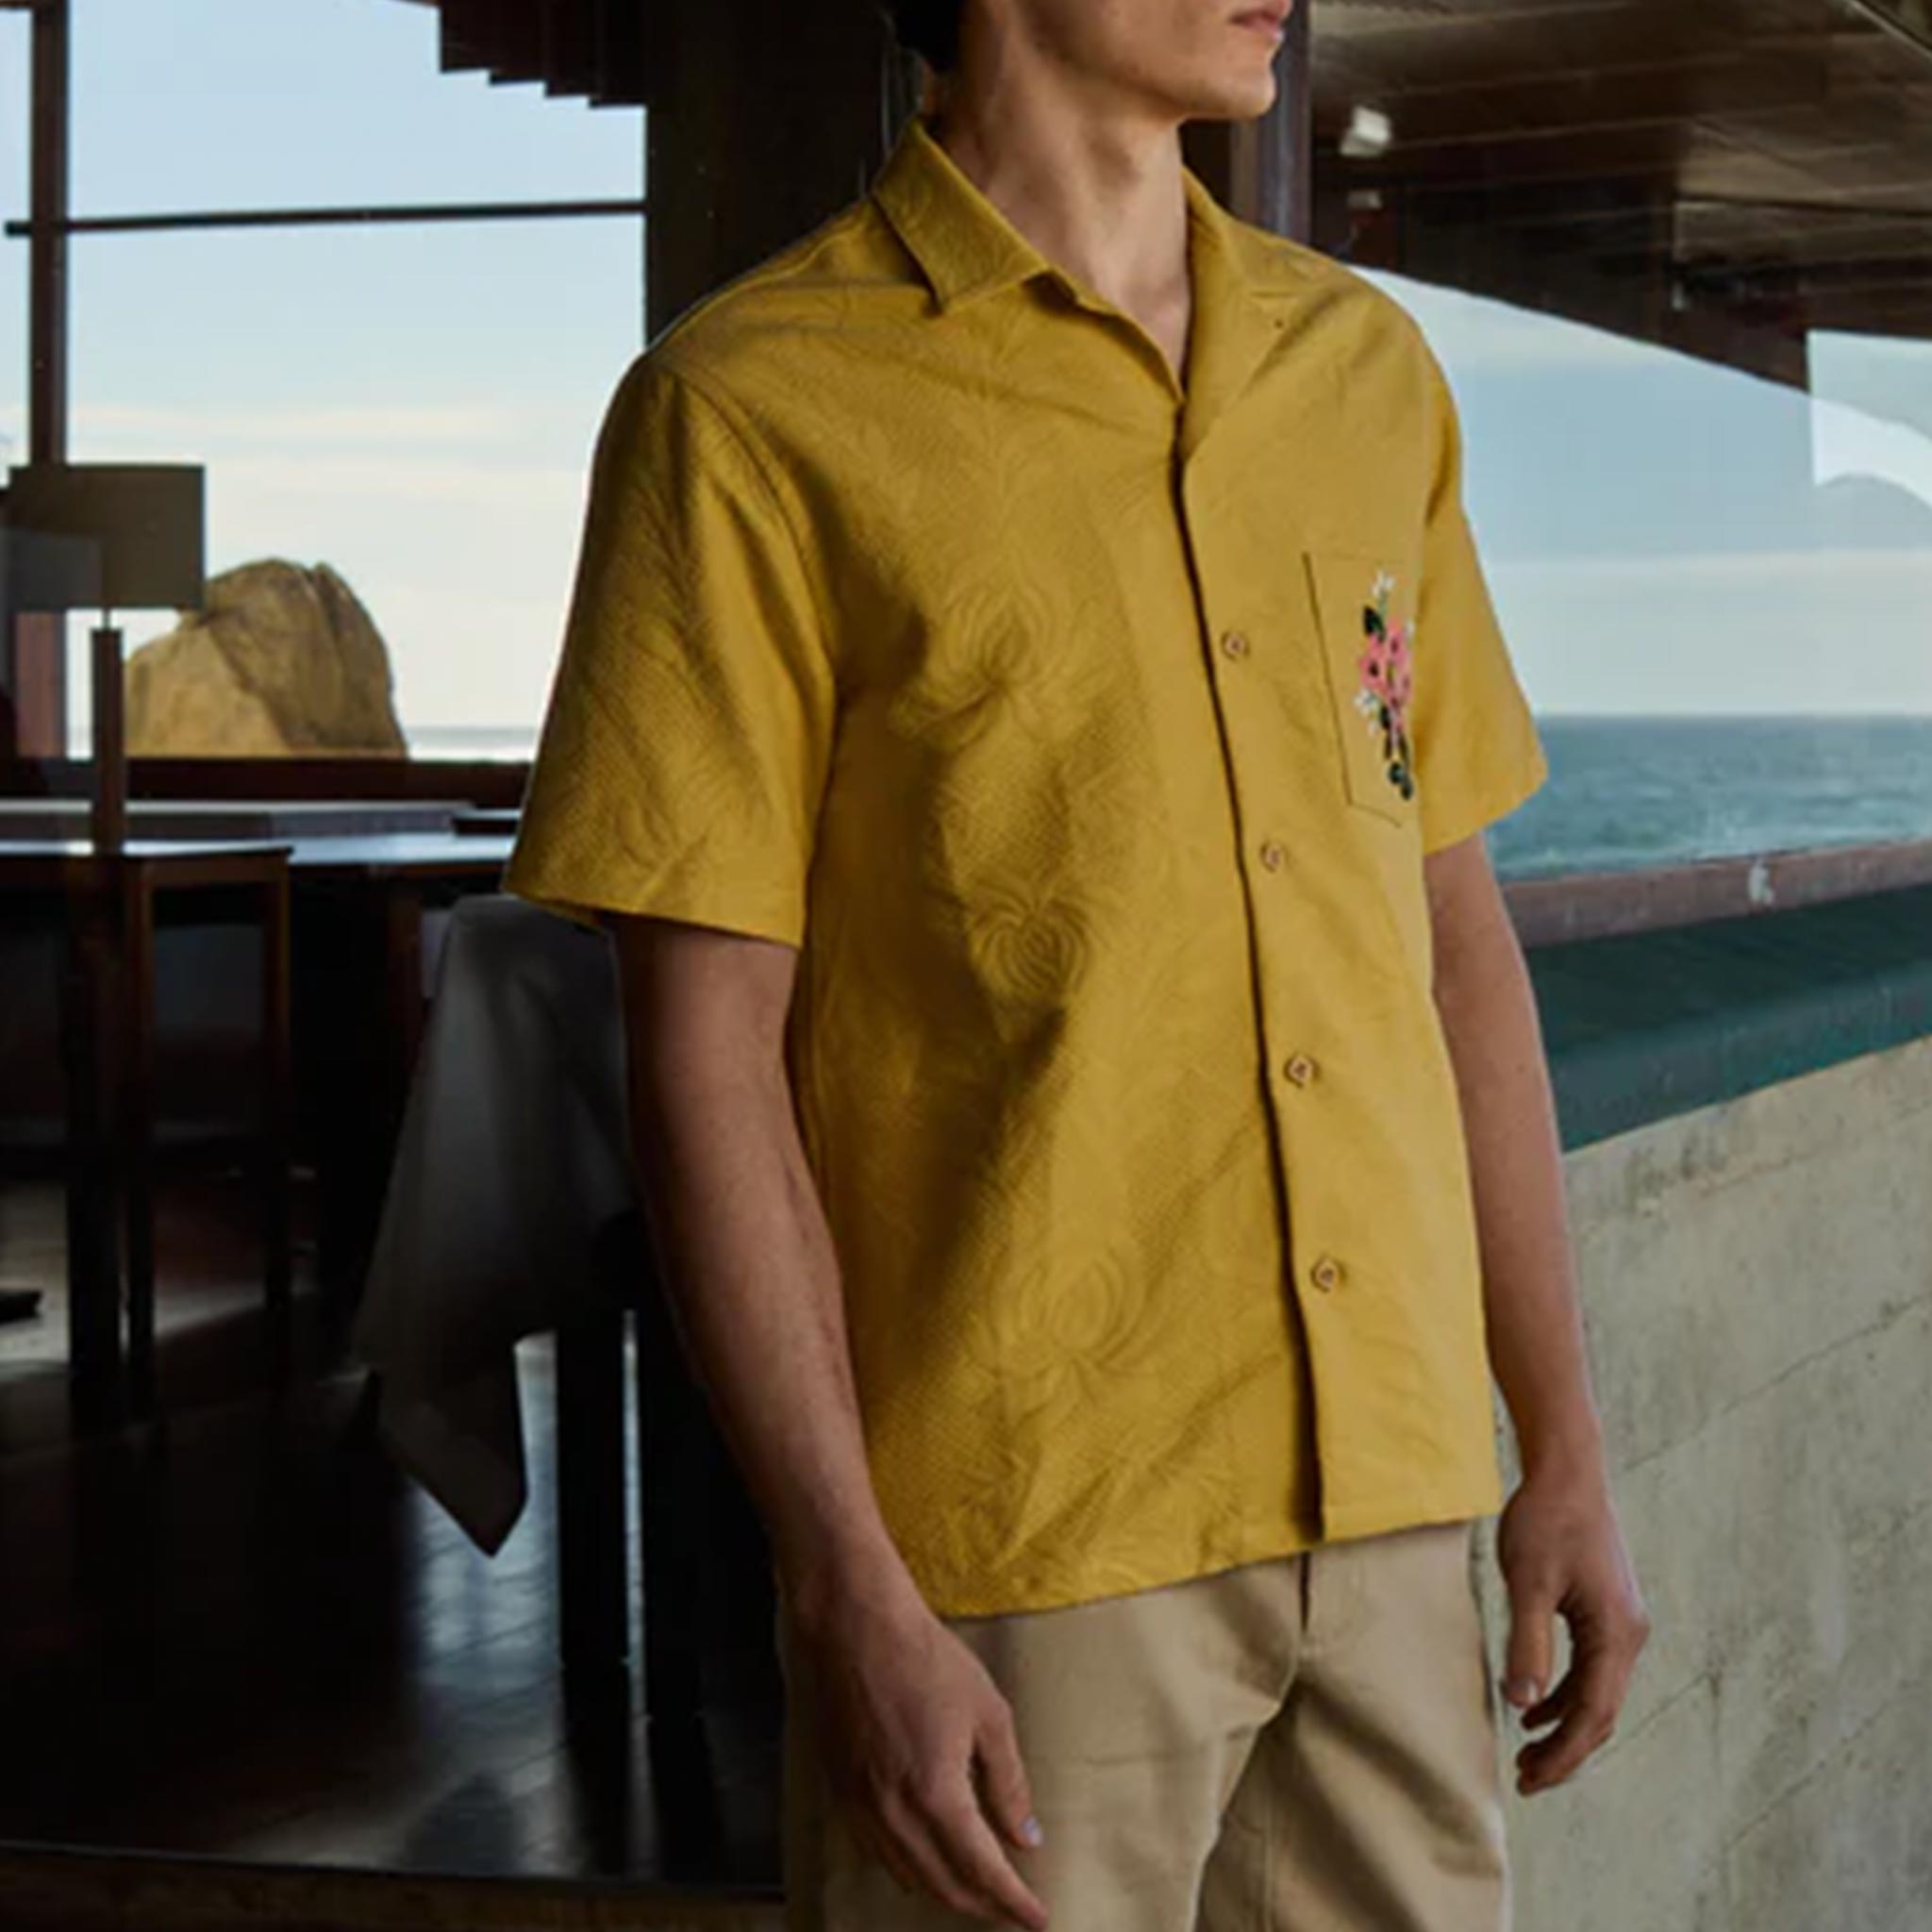 Beach Resort Shirt with Flower Embroidery